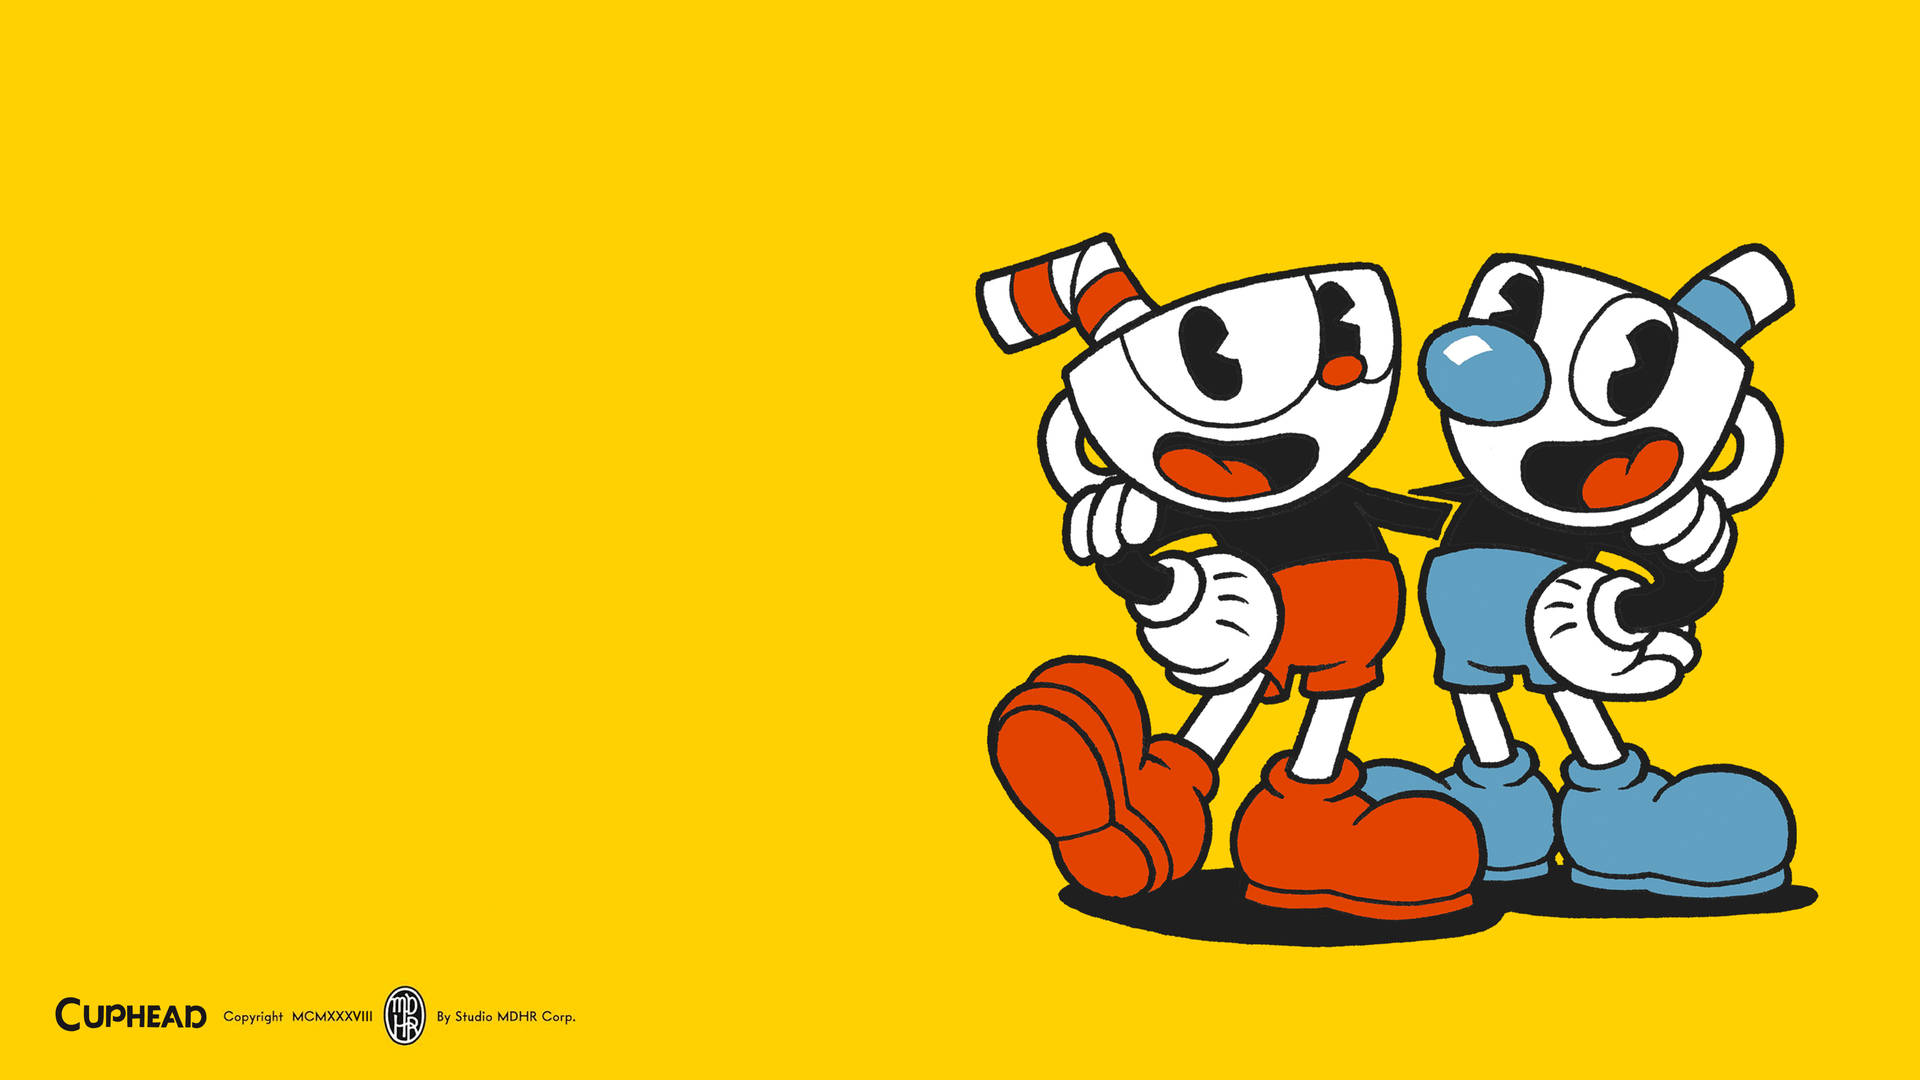 Cuphead 3840X2160 Wallpaper and Background Image